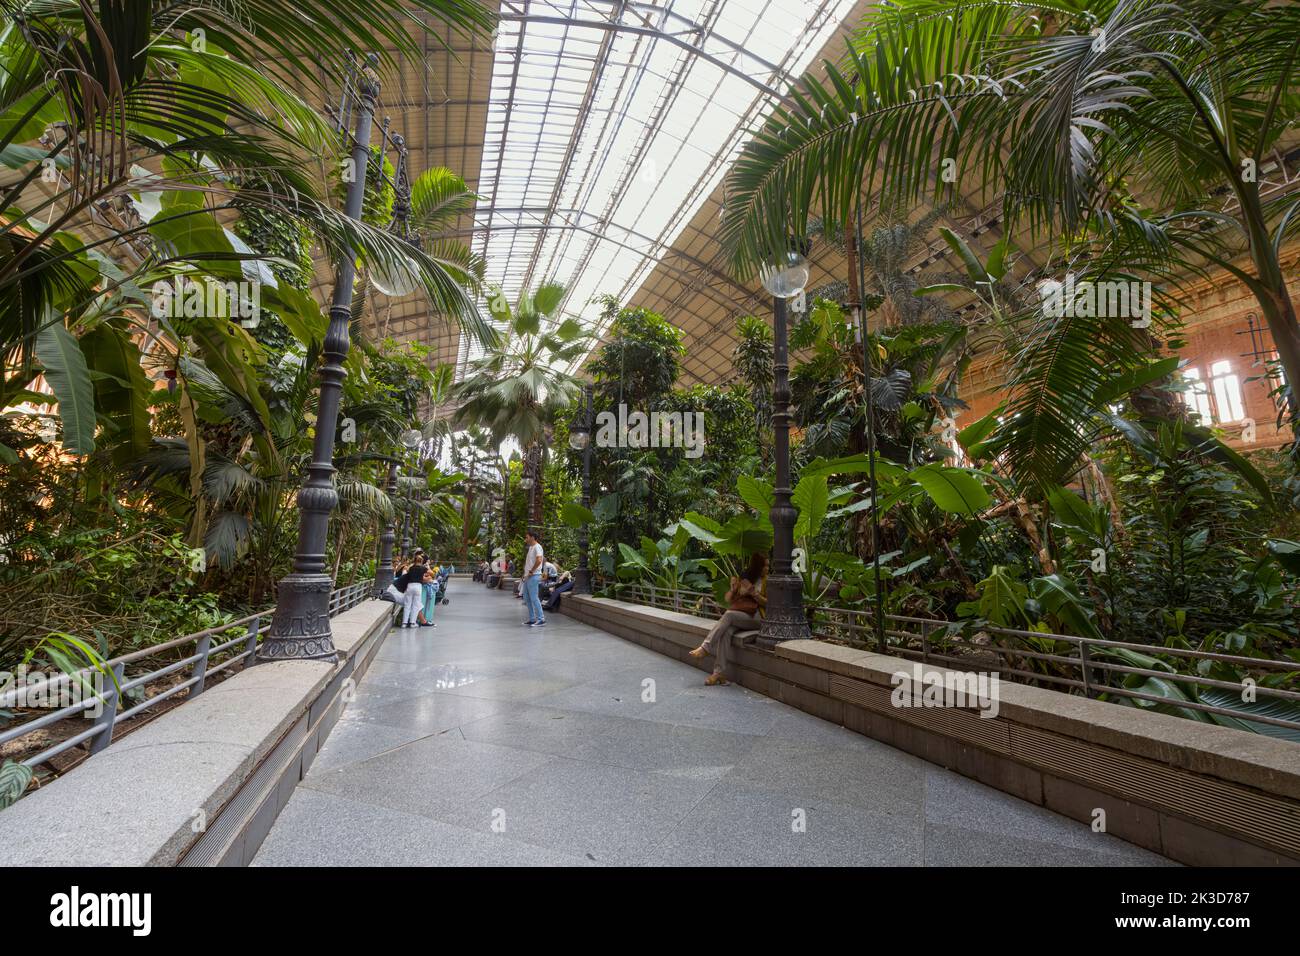 Madrid, Spain, September 2022. The indoor tropical garden in the Atocha railway station in the city center Stock Photo